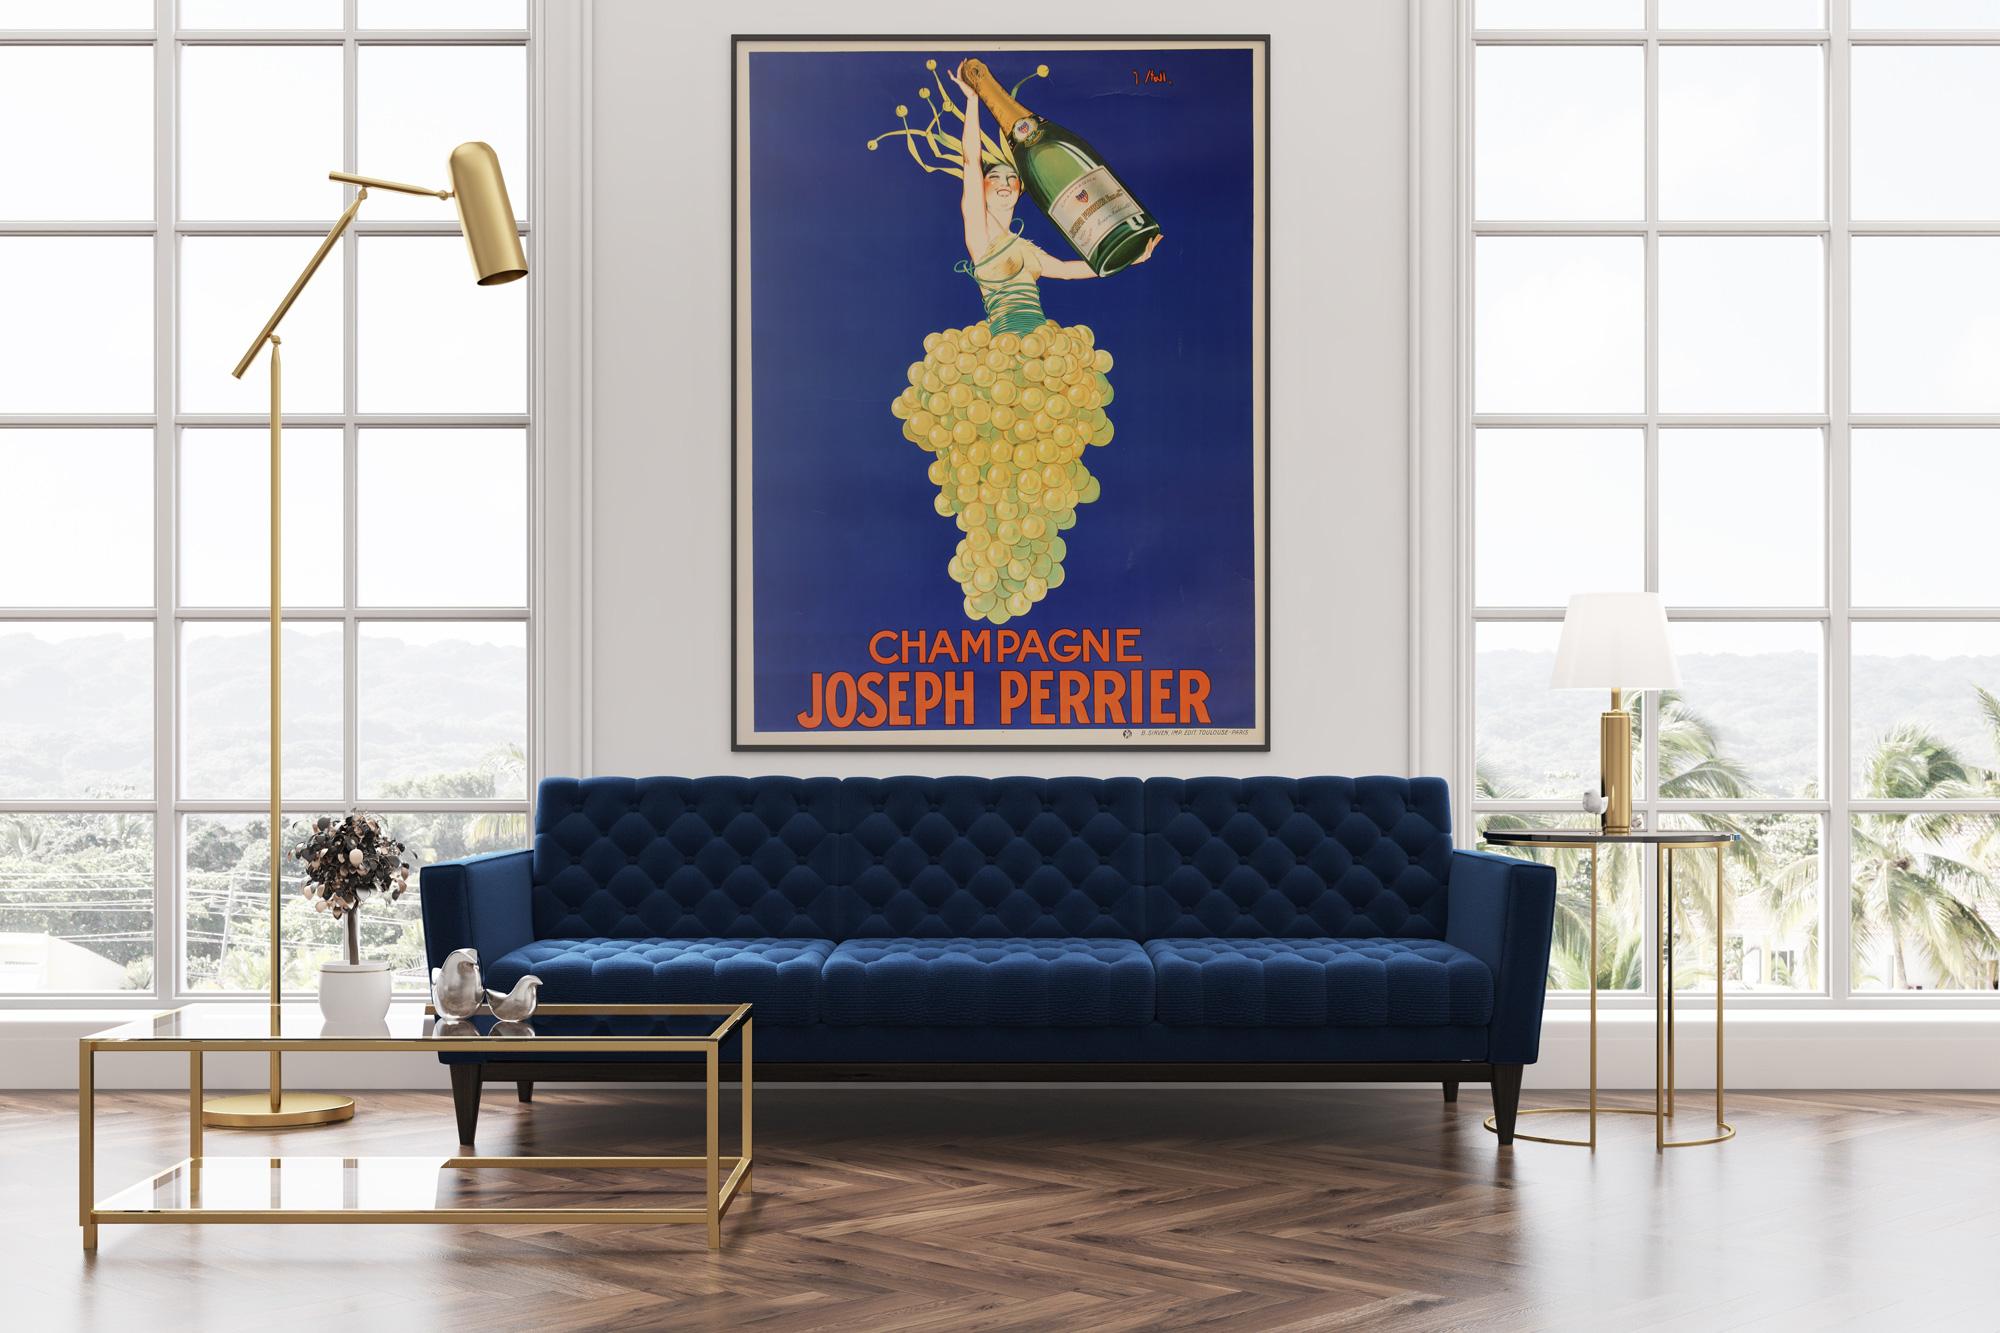 Fabulous art deco design by Joseph Stall features on this original Joseph Perrier French champagne poster from circa 1930. One of the most famous champagne posters, Stall certainly makes a pop wth his design of a grape nymph as gloriously happy as I